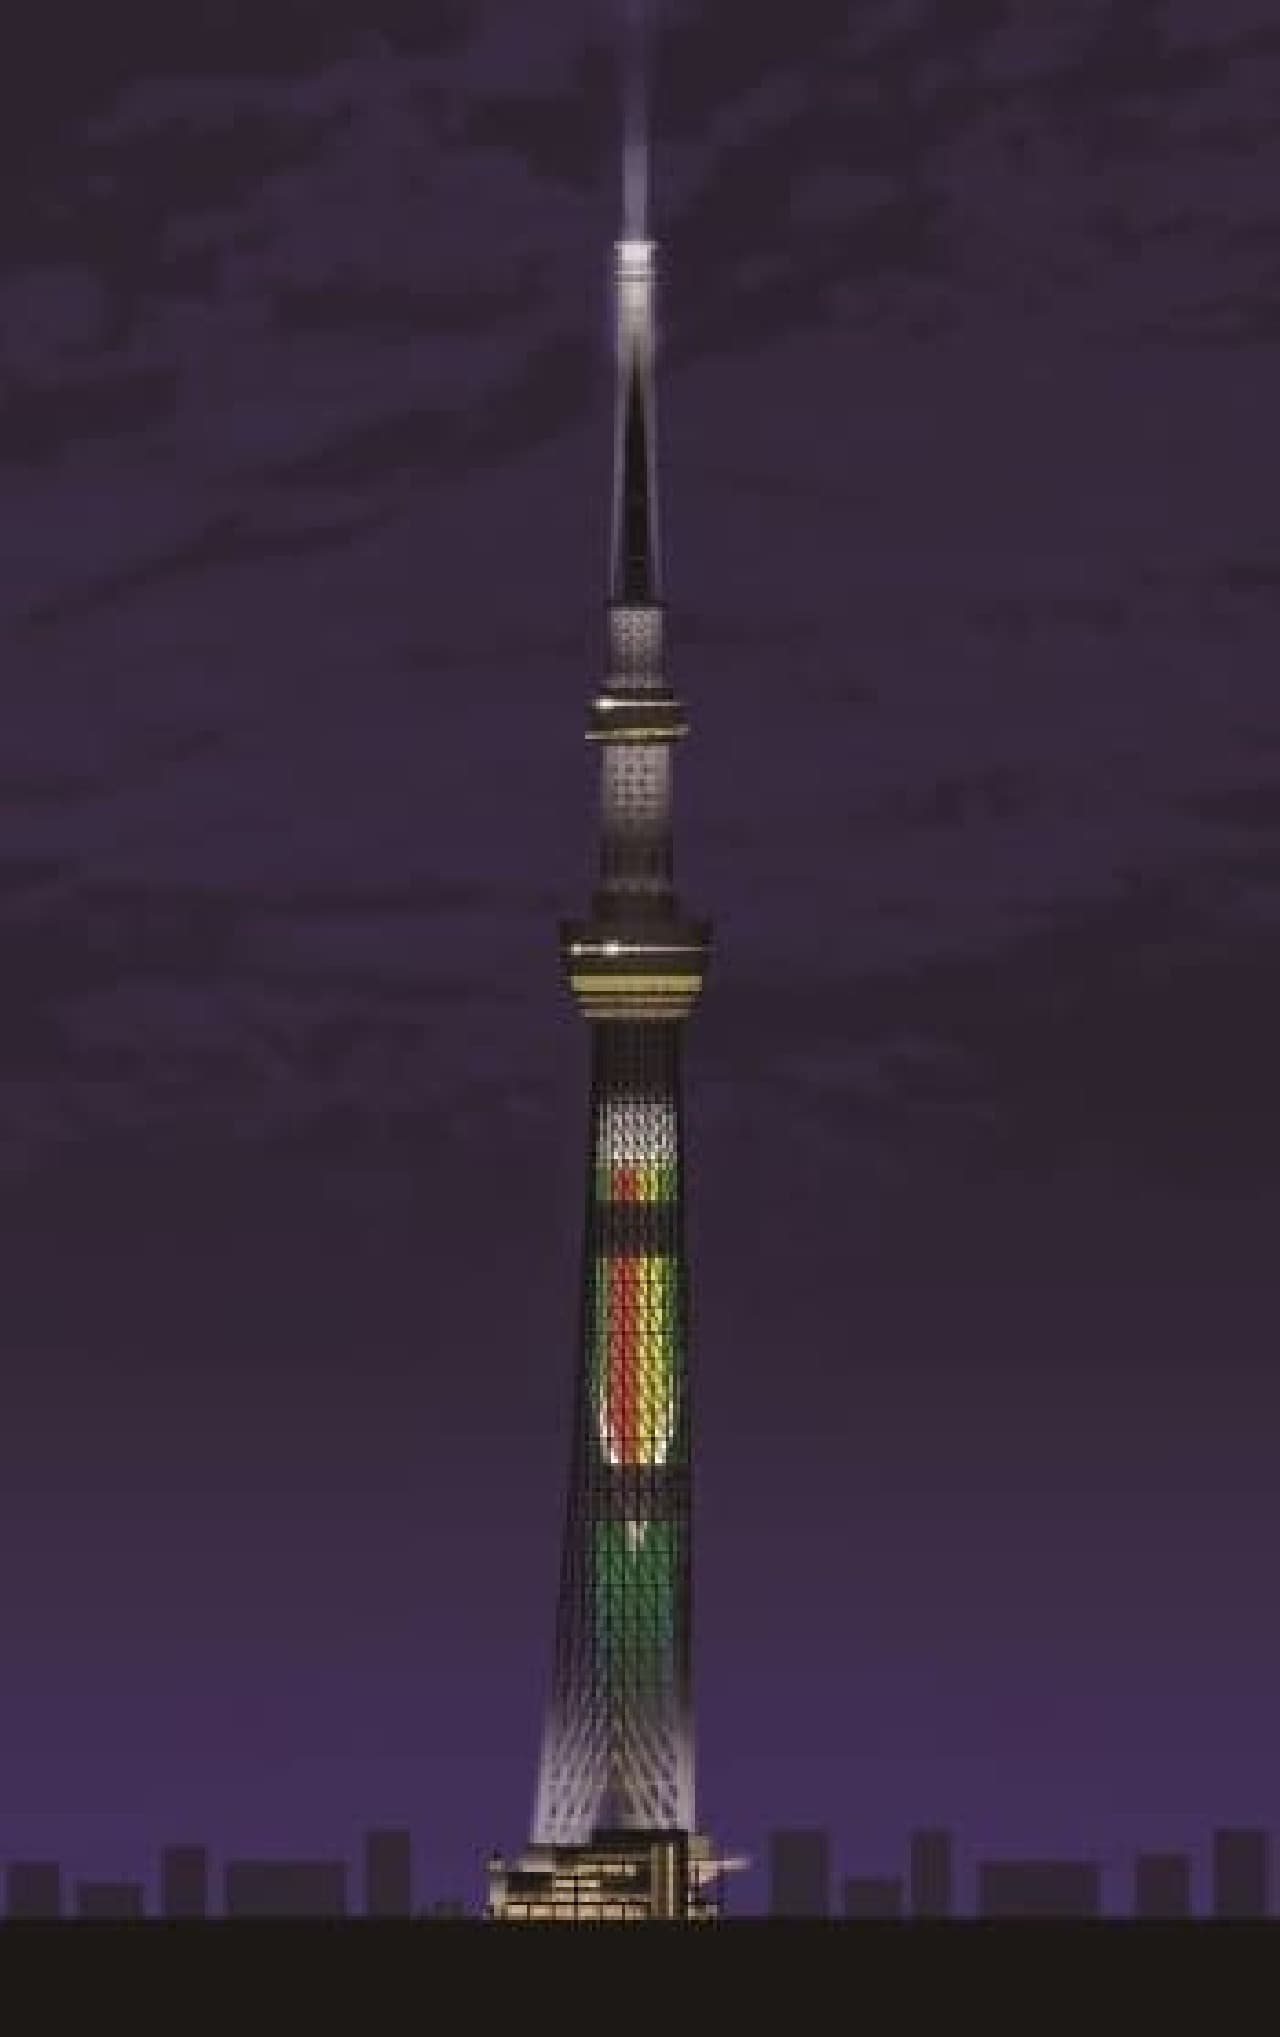 Lighting of "hand-rolled sushi" on Tokyo Sky Tree